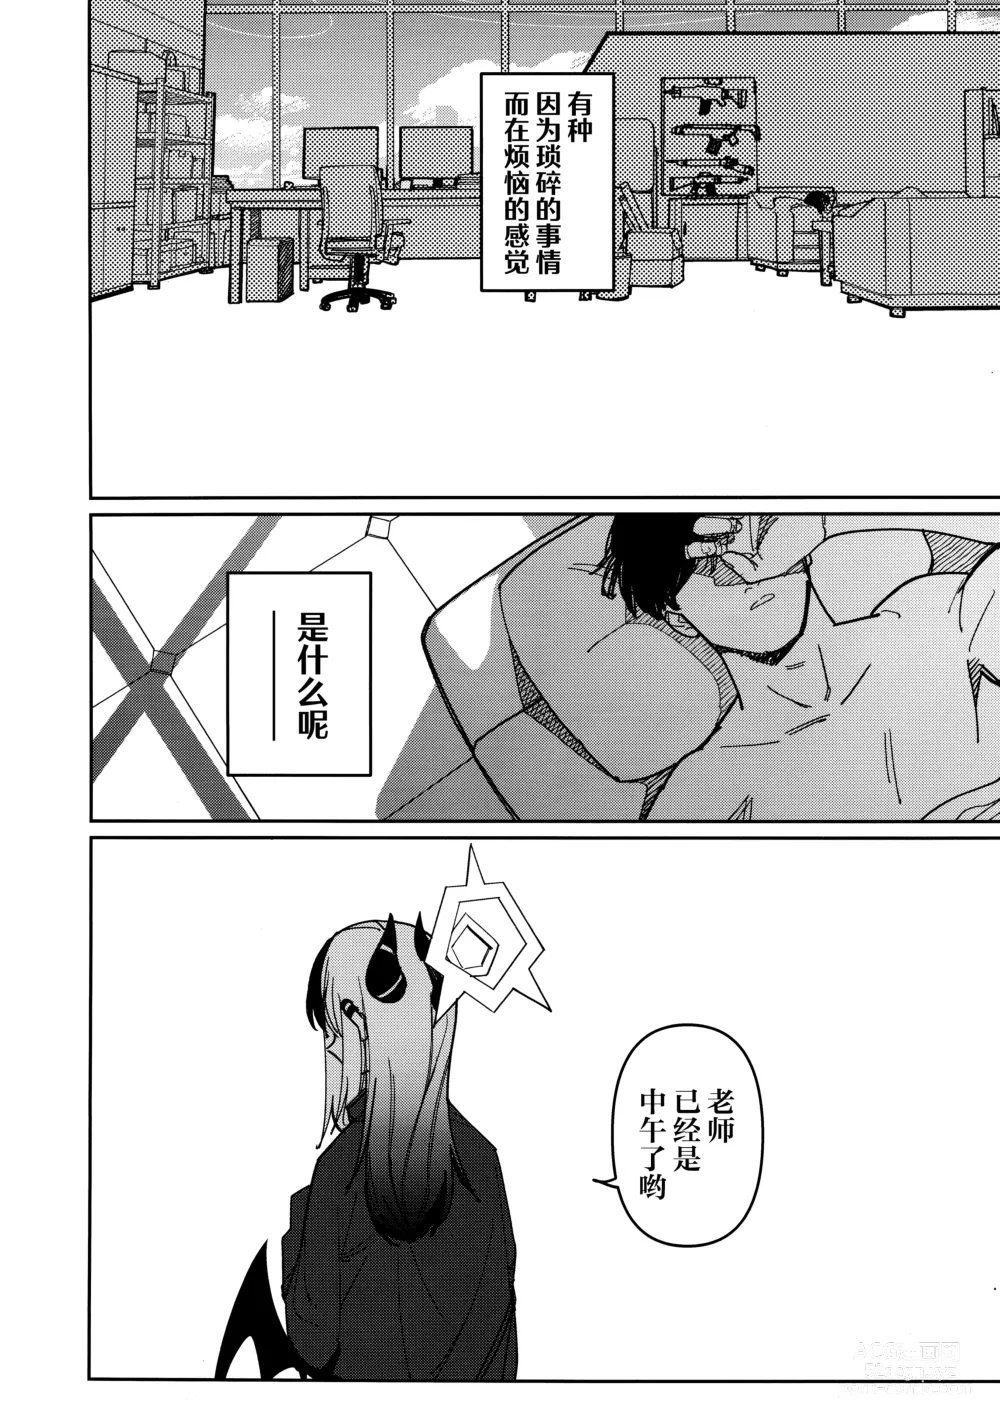 Page 22 of doujinshi 鬼方佳代子不会做这种事情 Part.2